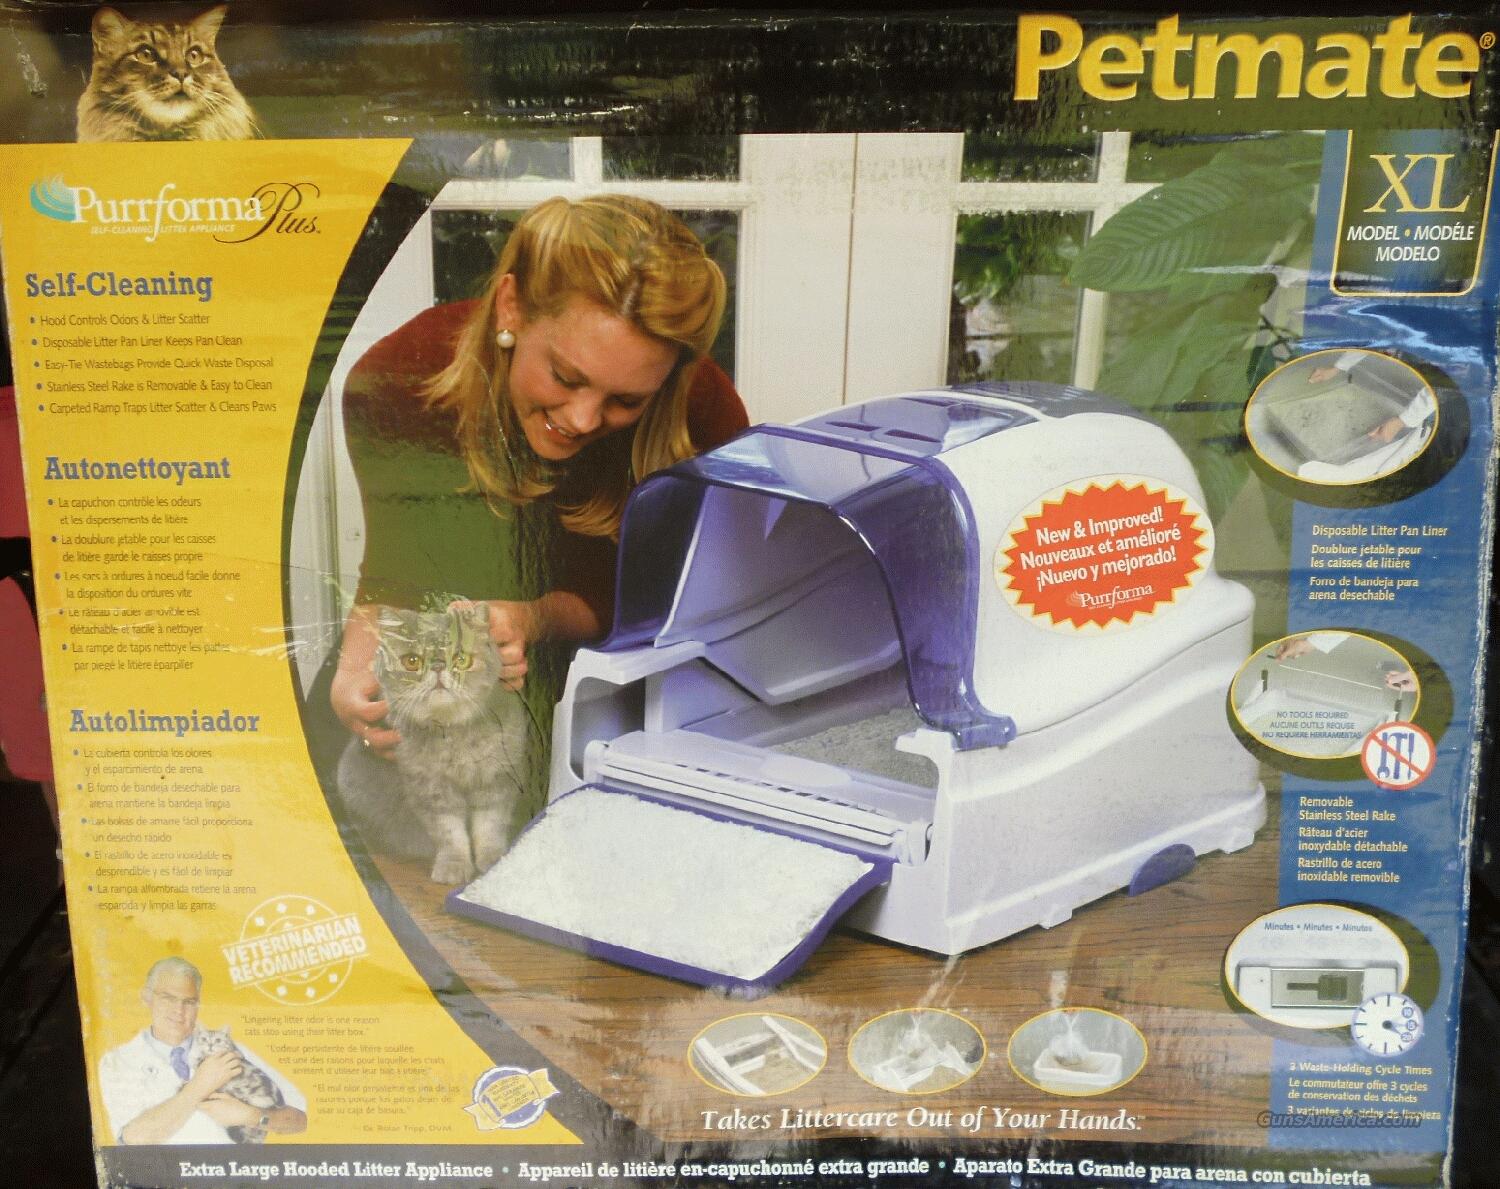 PETMATE PURRFORMA PLUS XL SELF-CLEANING 